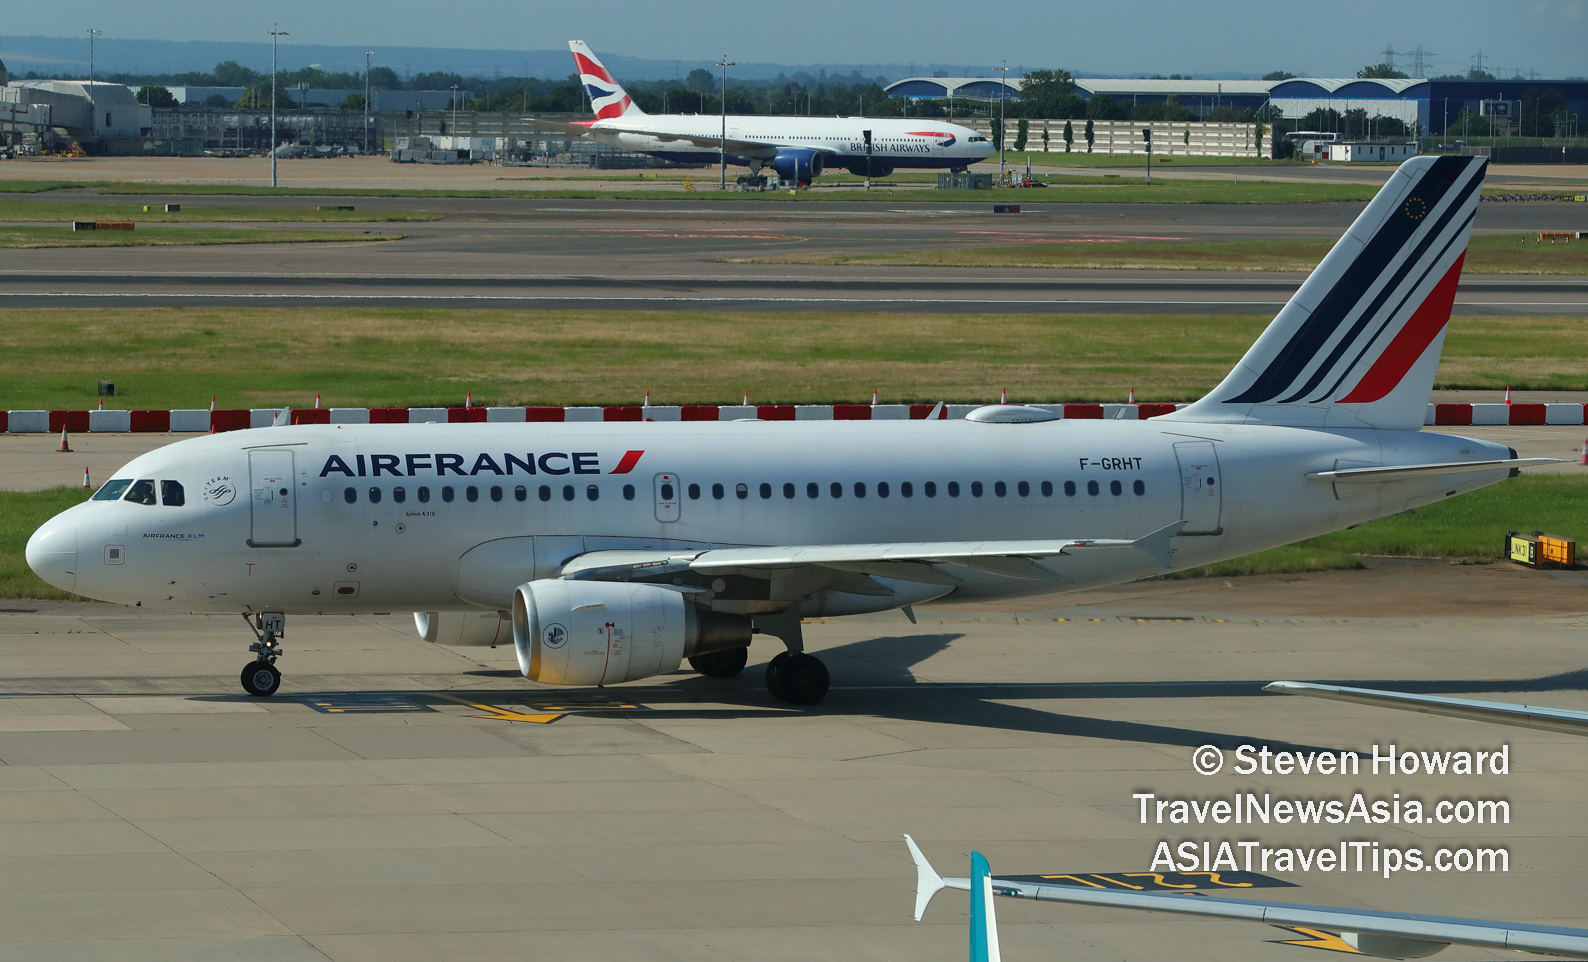 Air France Airbus A319 reg: F-GRHT. Picture by Steven Howard of TravelNewsAsia.com Click to enlarge.